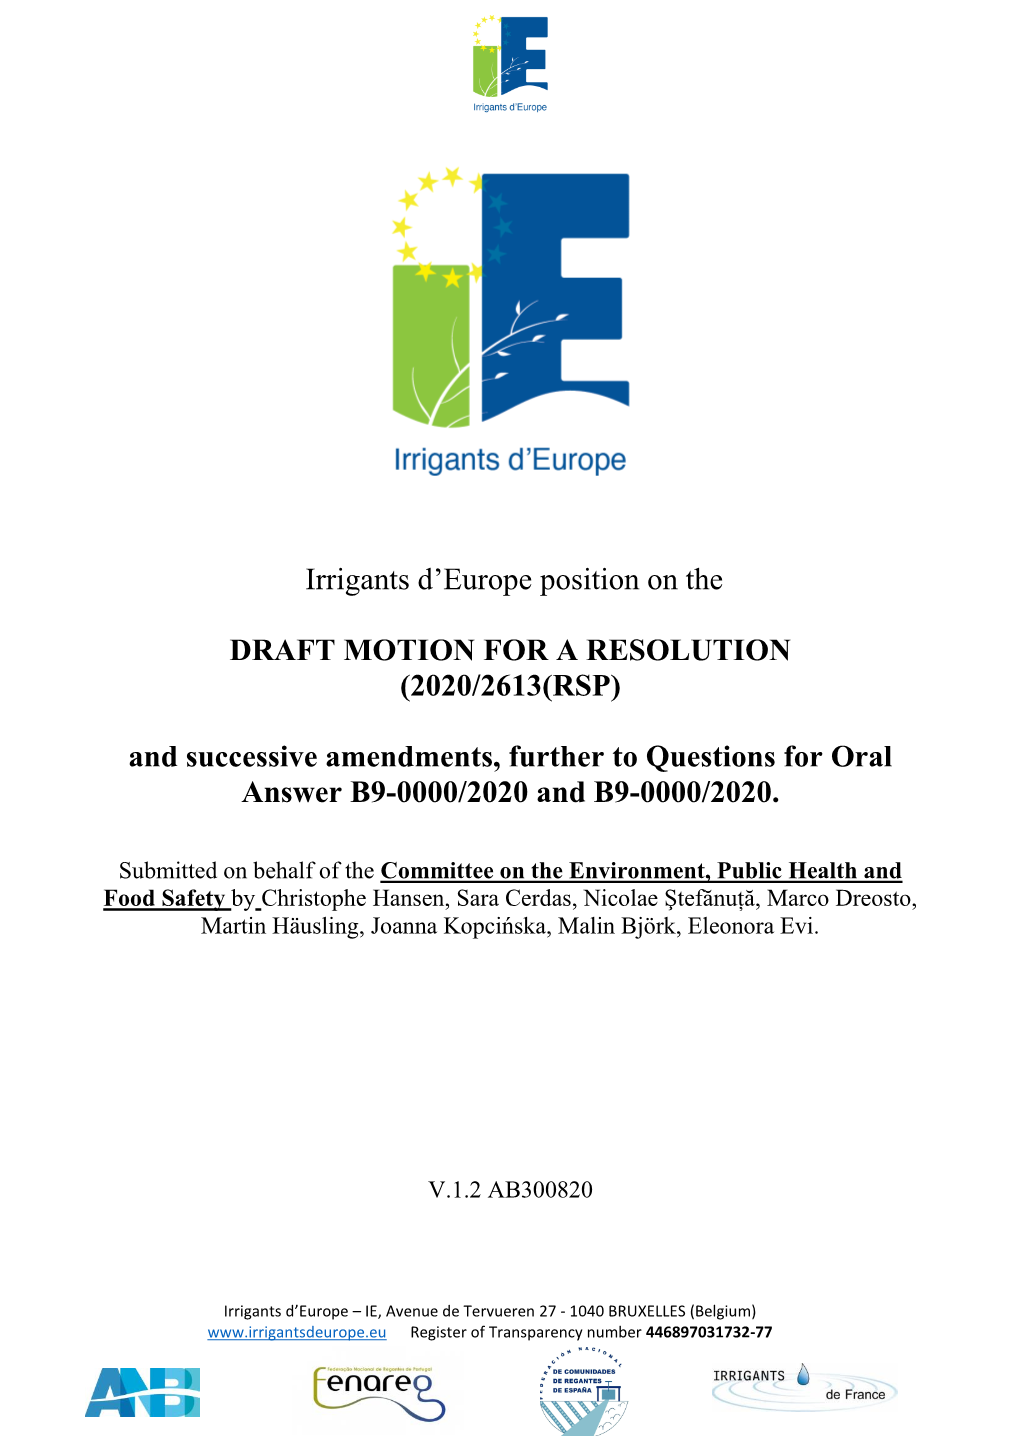 Irrigants D'europe Position on the DRAFT MOTION for a RESOLUTION (2020/2613(RSP) and Successive Amendments, Further to Questi